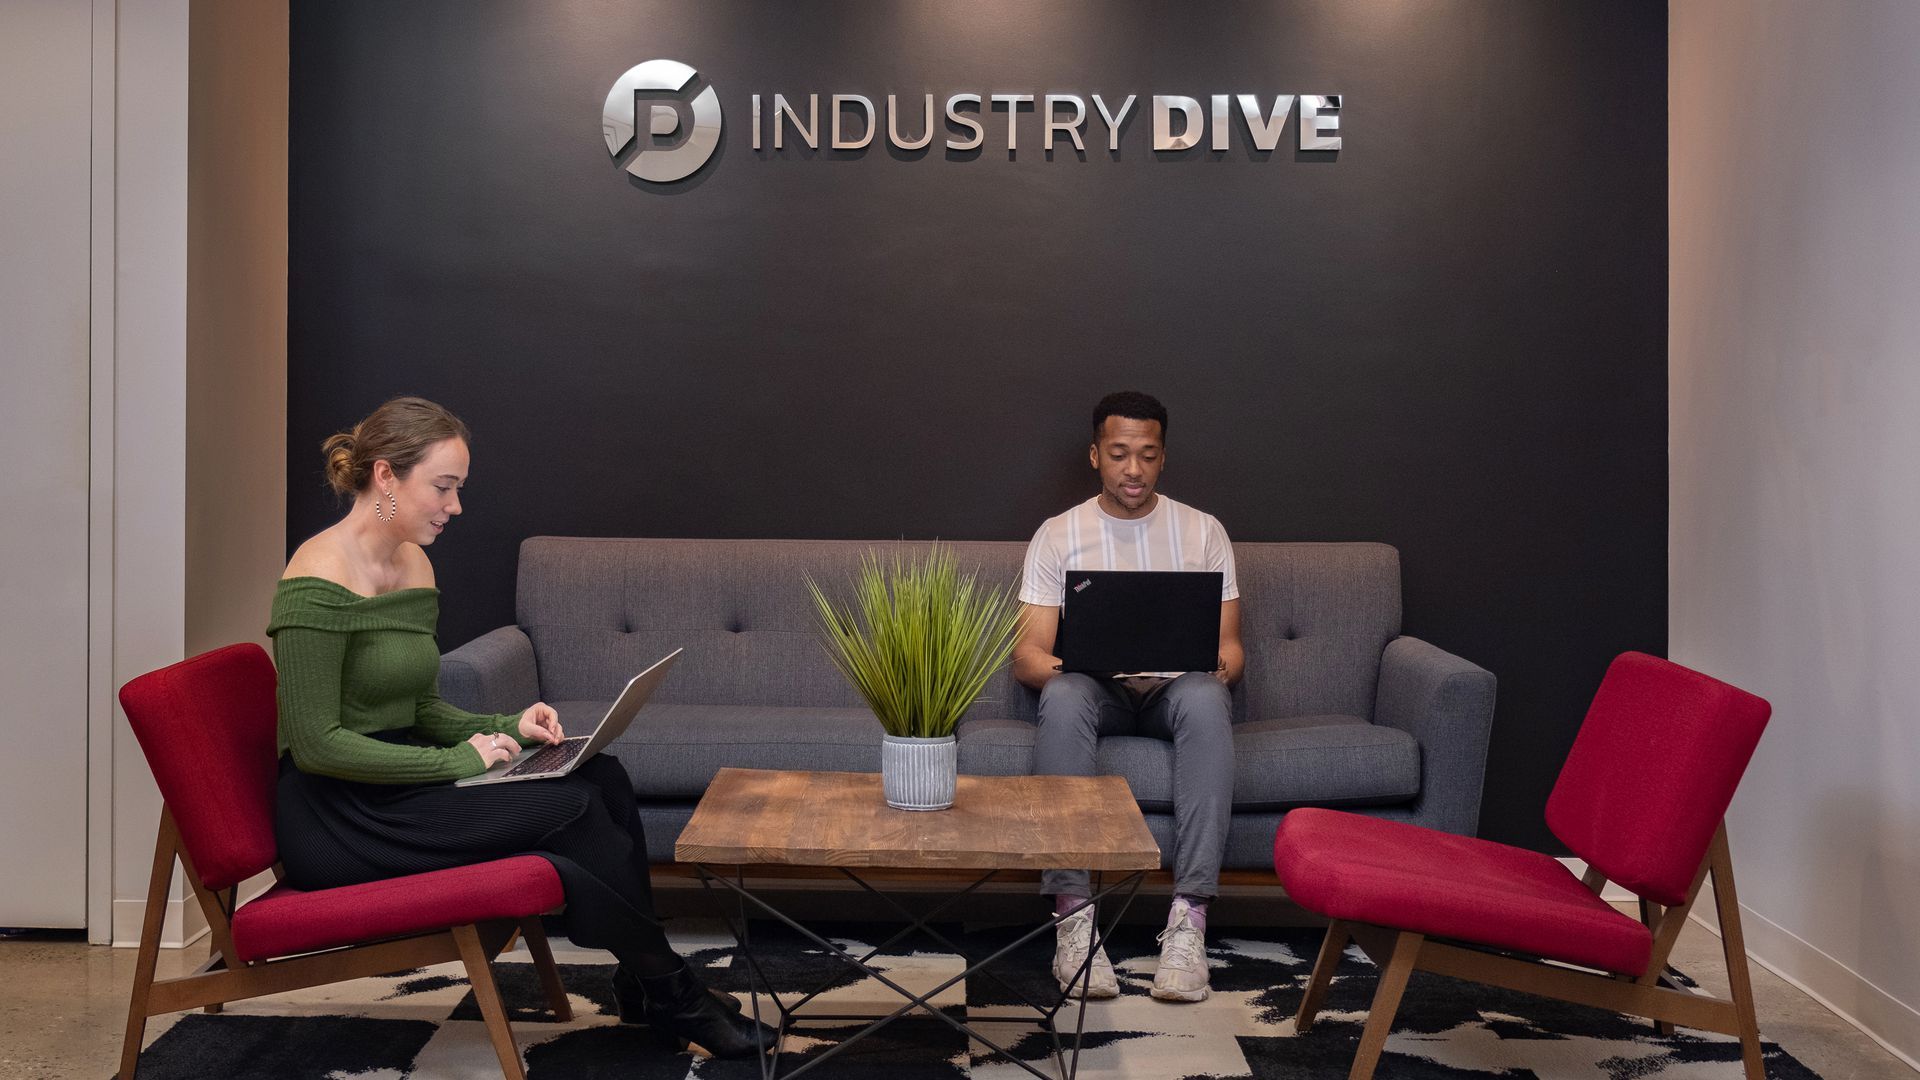 Two people sit on chairs under a logo that says "Industry Dive" 